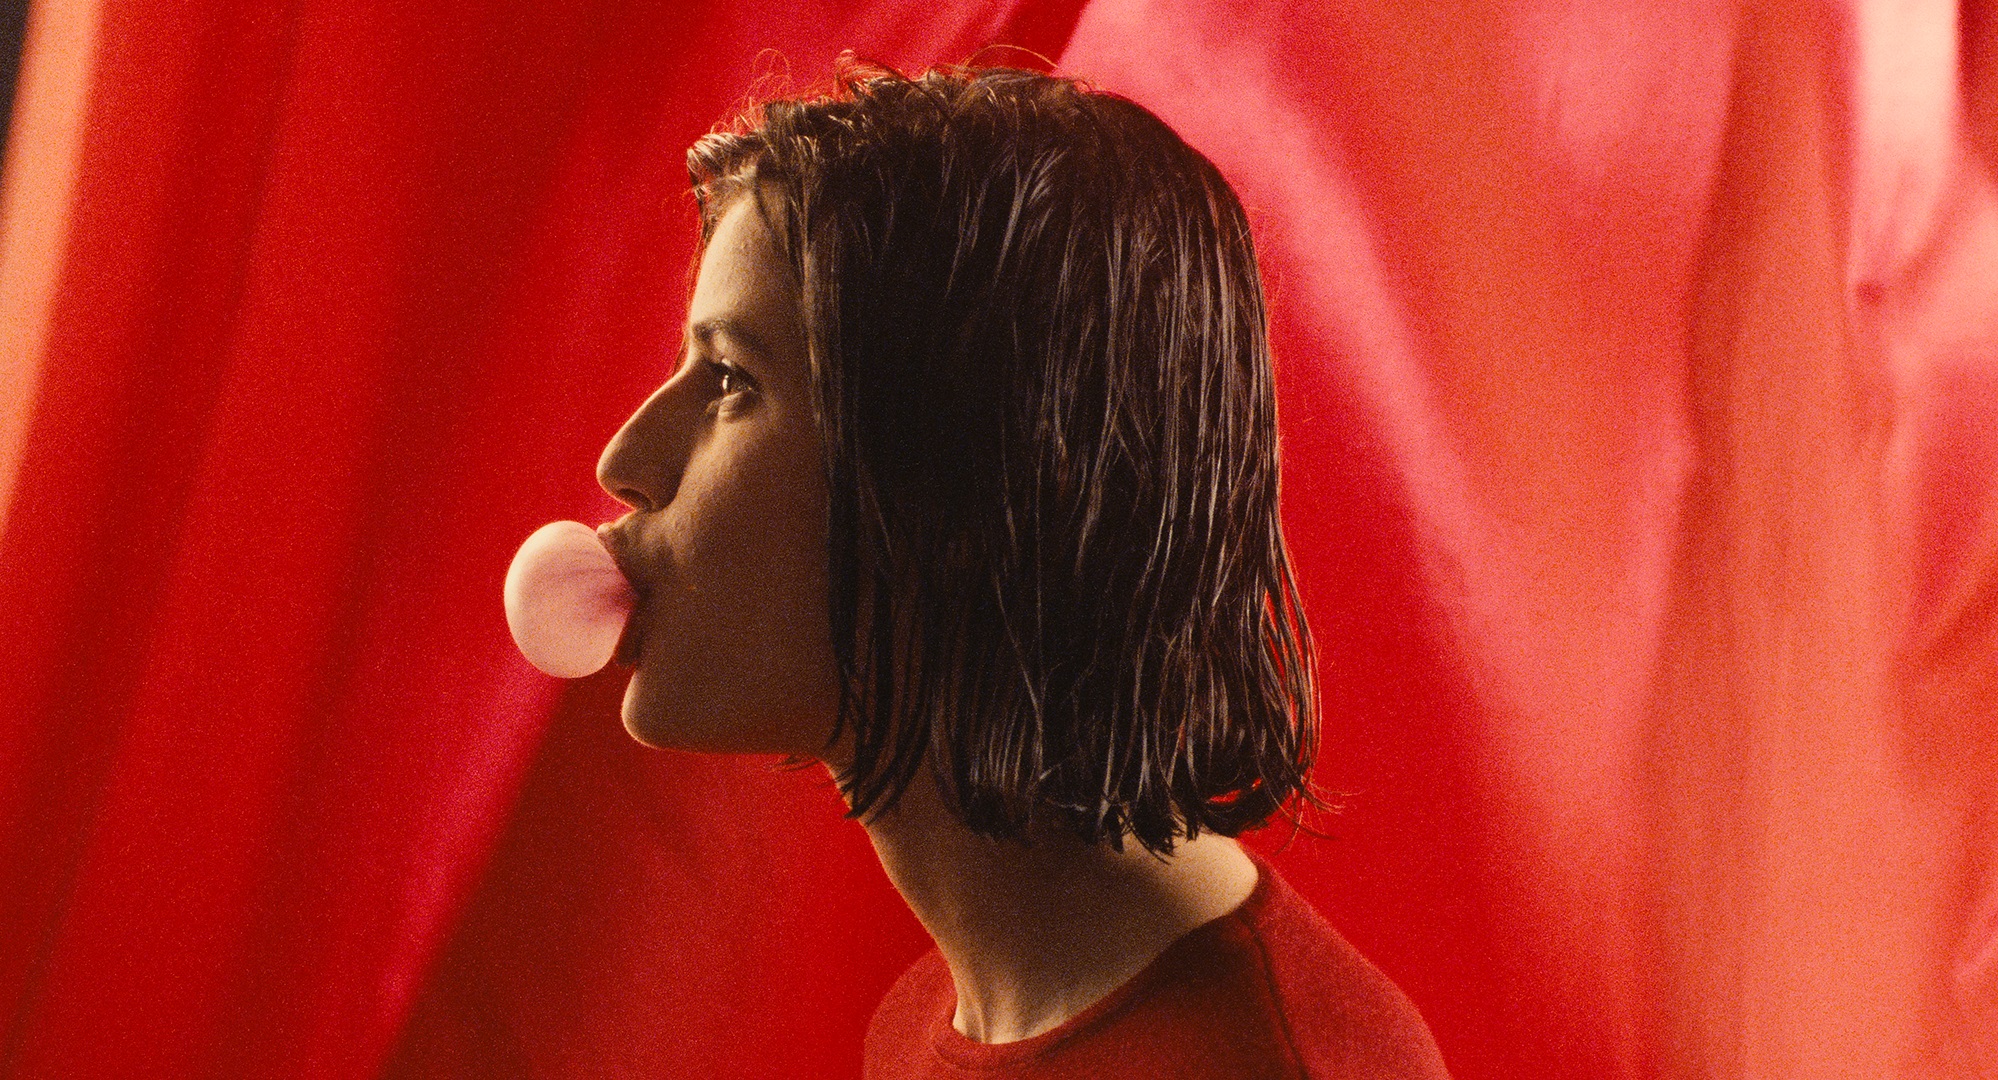 A profile show of a  young woman blowing bubblegum, in front of a red fabric backdrop. 